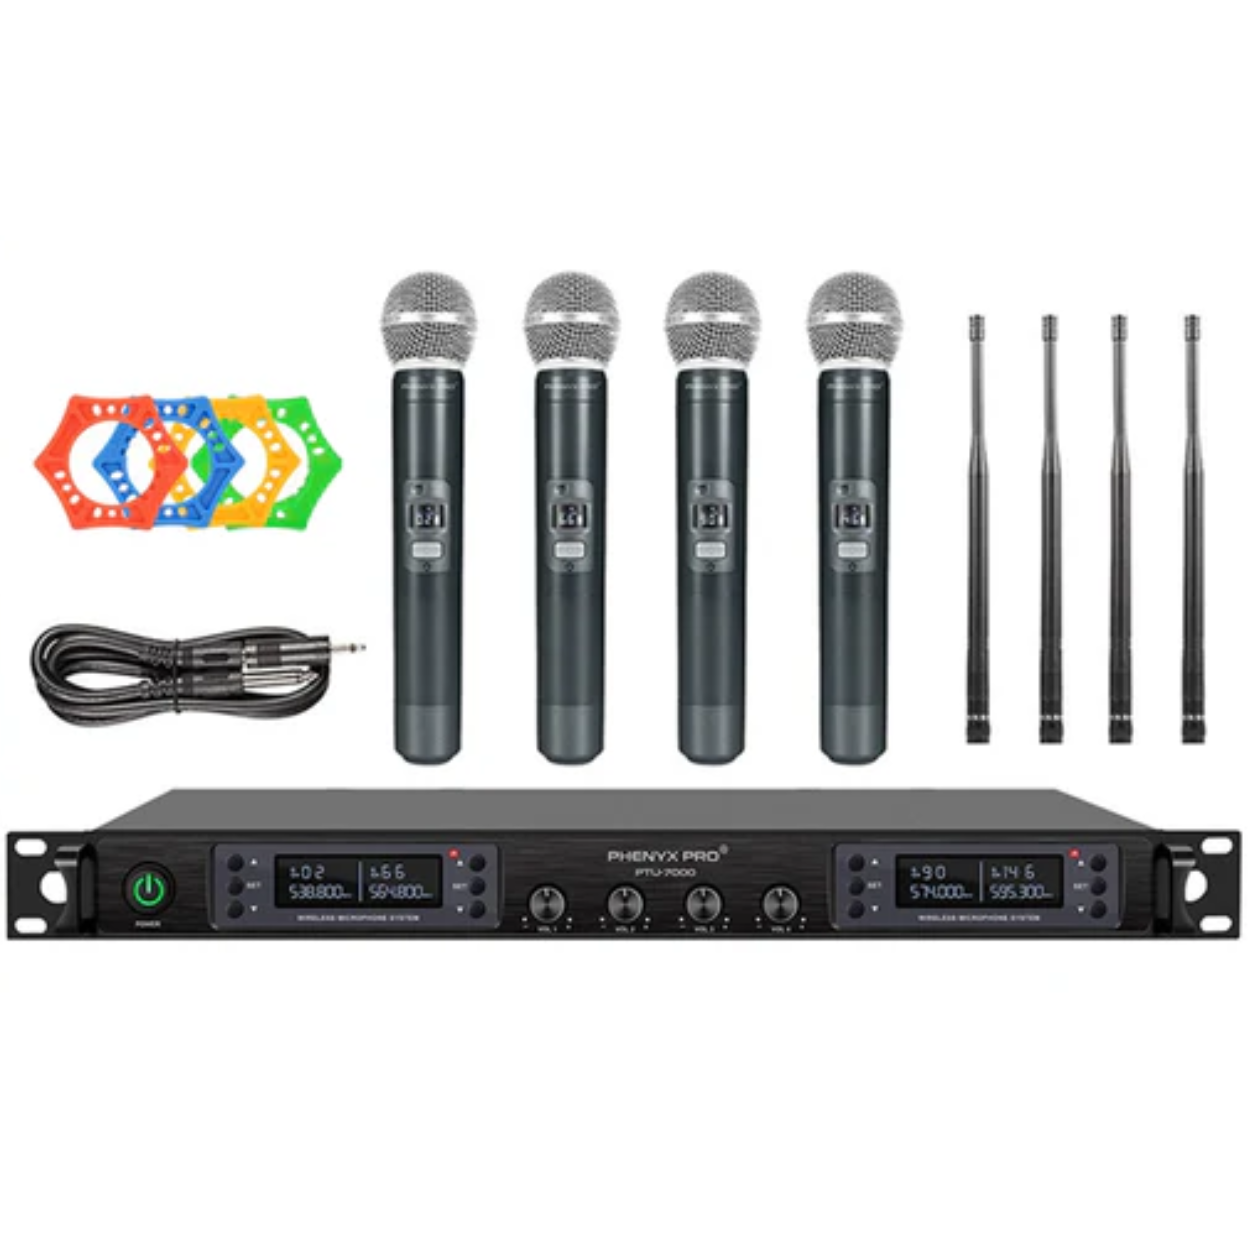 Phenyx Pro Best Budget Wireless PTU-7000A 4-channel UHF Wireless Microphone System, with 4x Handheld Dynamic Microphones | Zoso Music Sdn Bhd